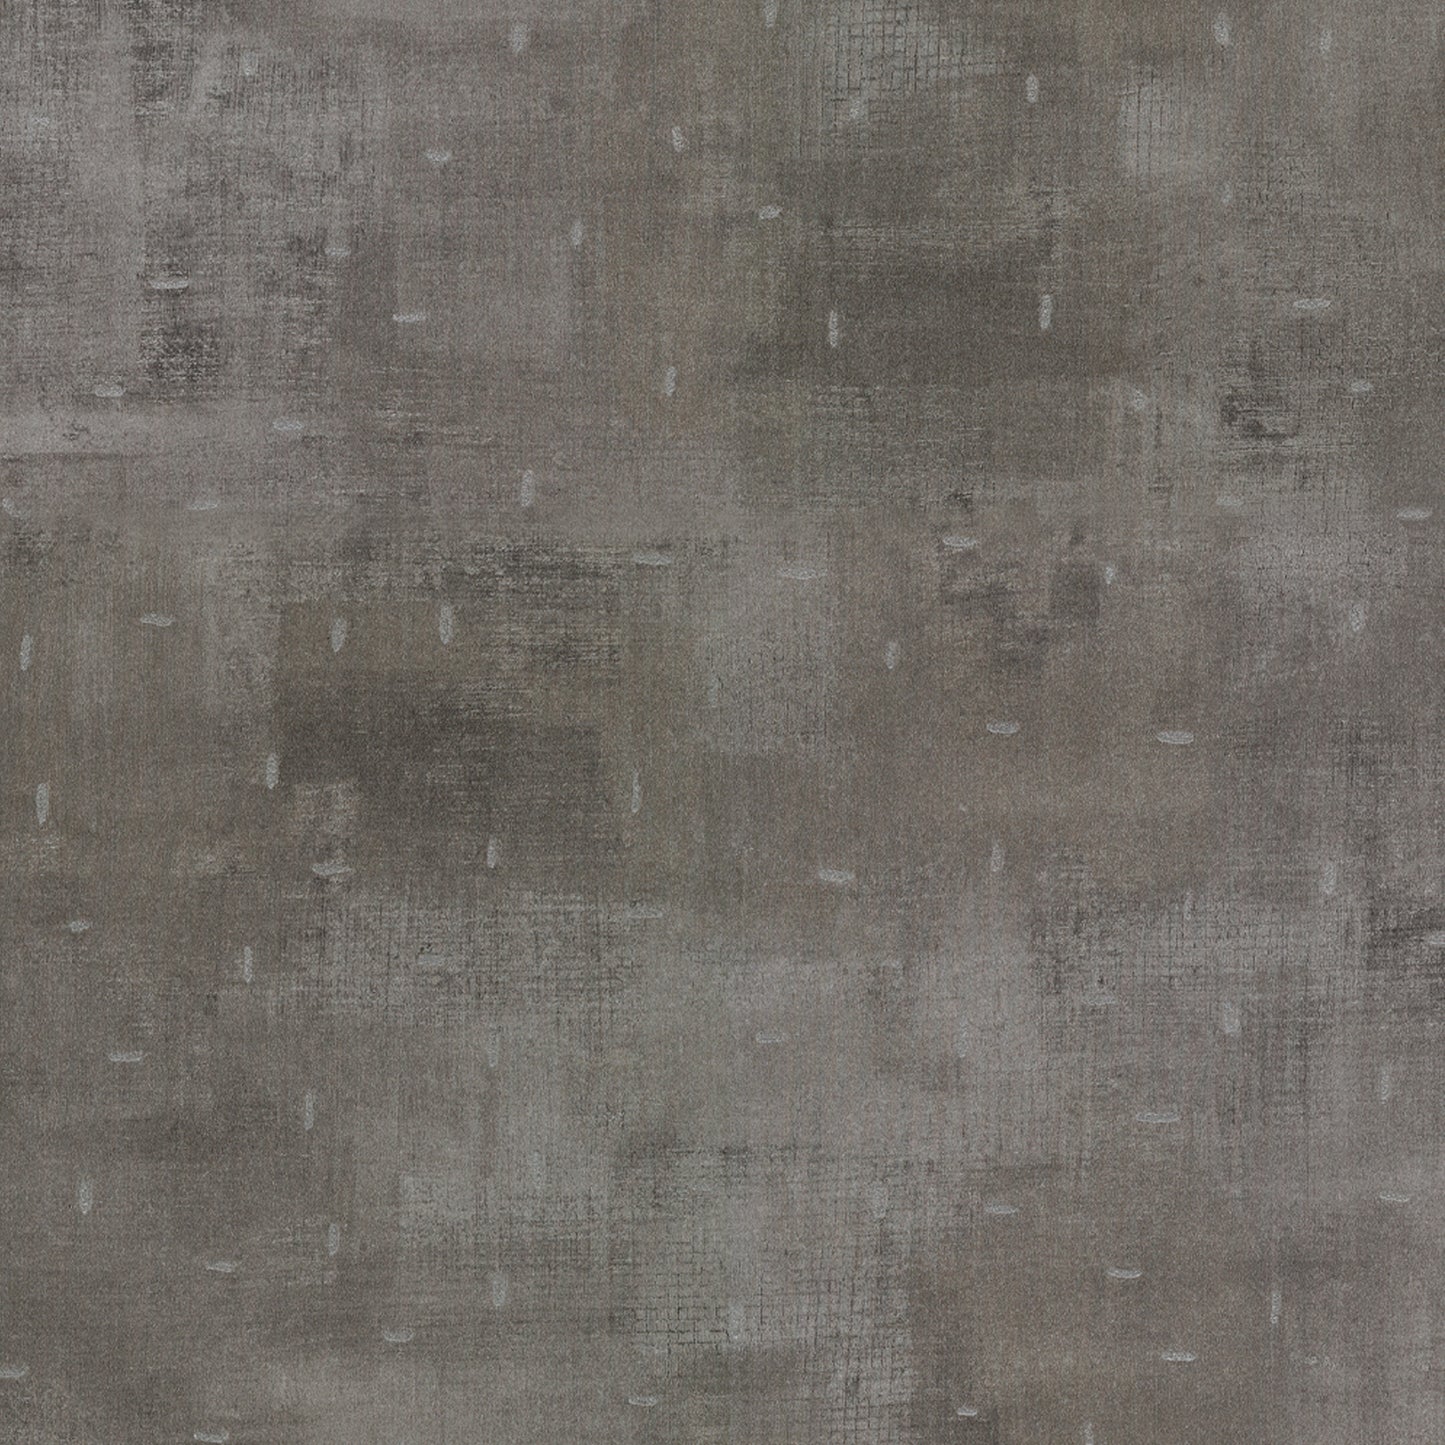 Acquire 2927-10301 Polished Portia Pewter Distressed Texture Pewter Brewster Wallpaper